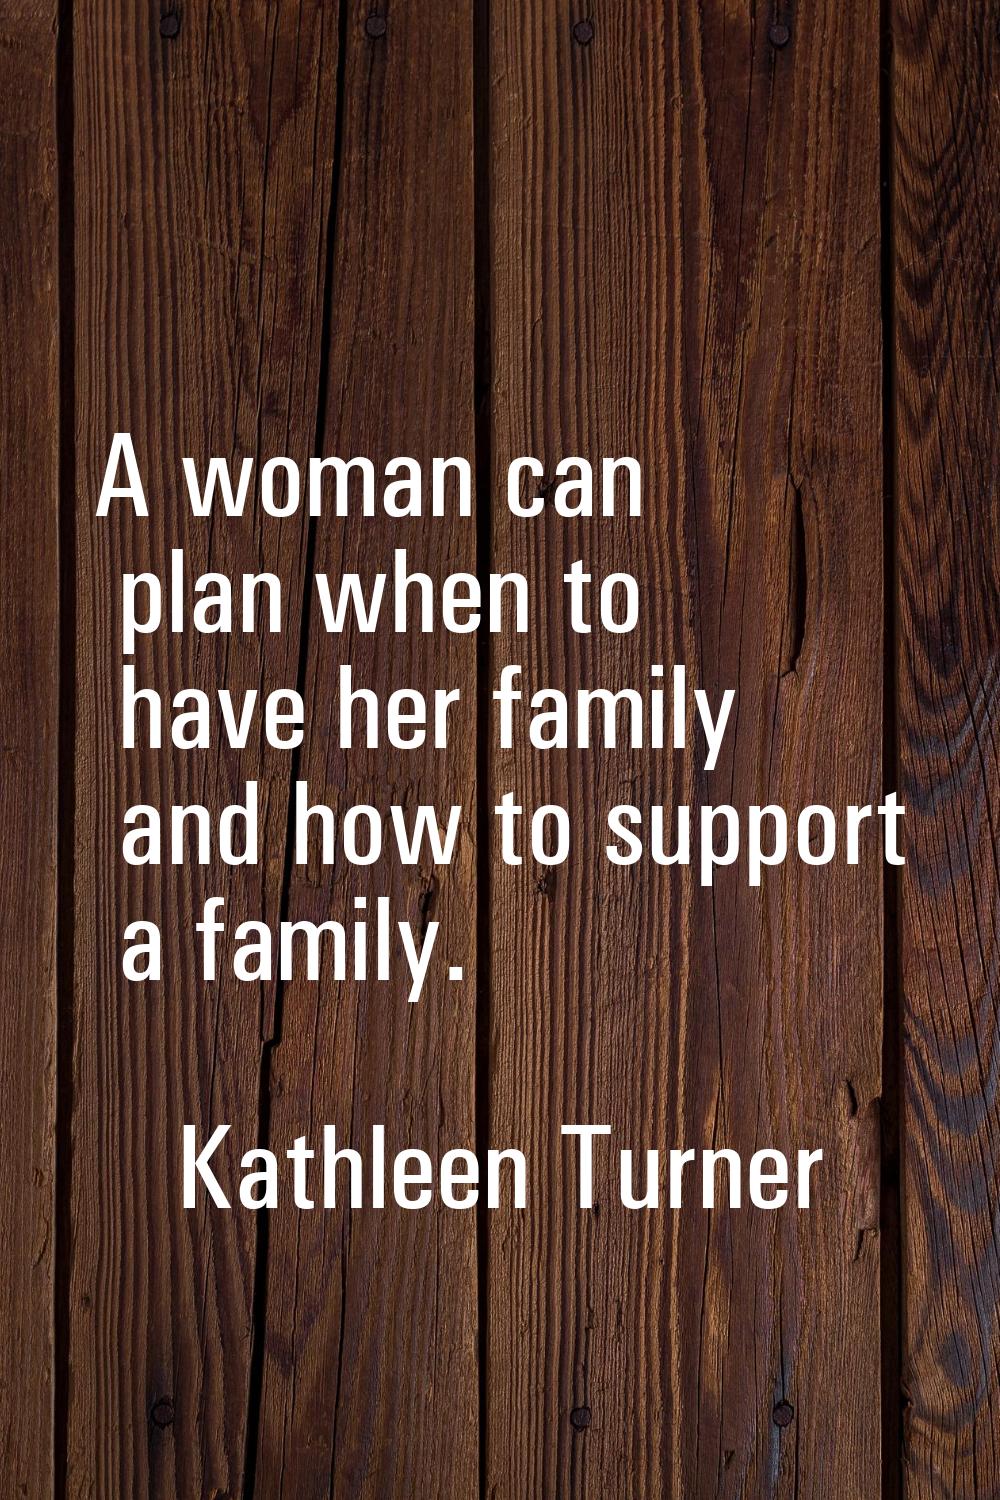 A woman can plan when to have her family and how to support a family.